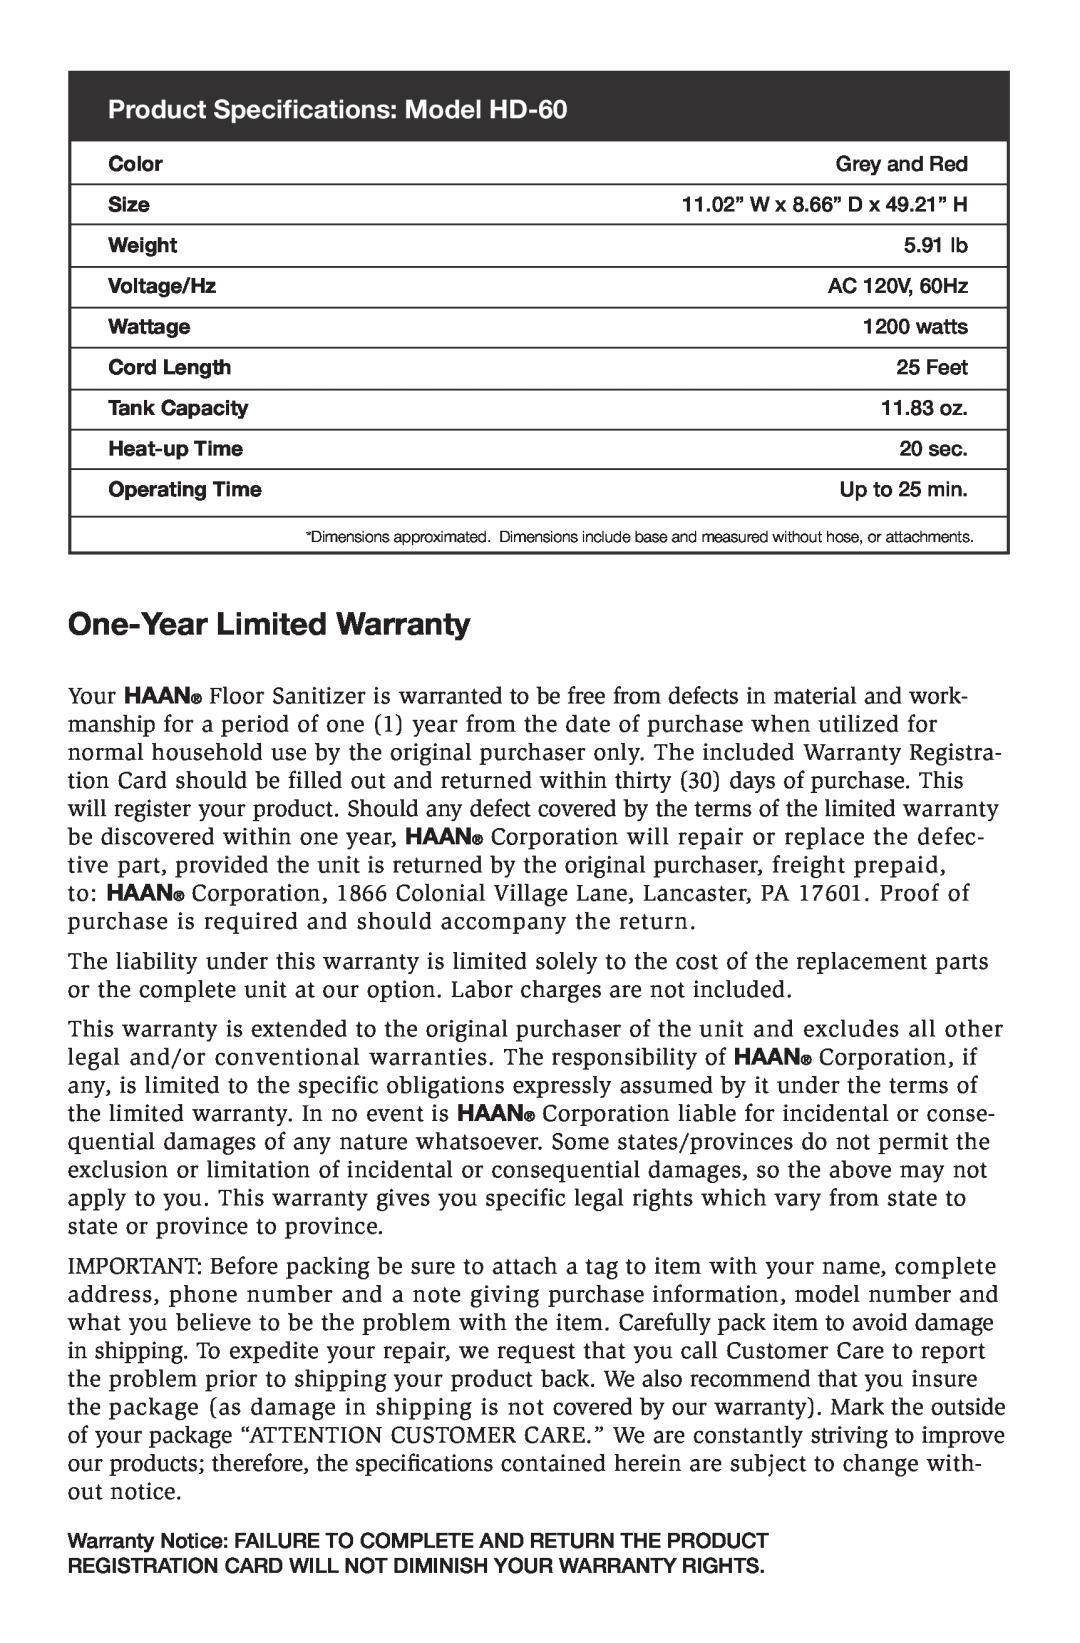 Haan instruction manual One-YearLimited Warranty, Product Specifications Model HD-60 